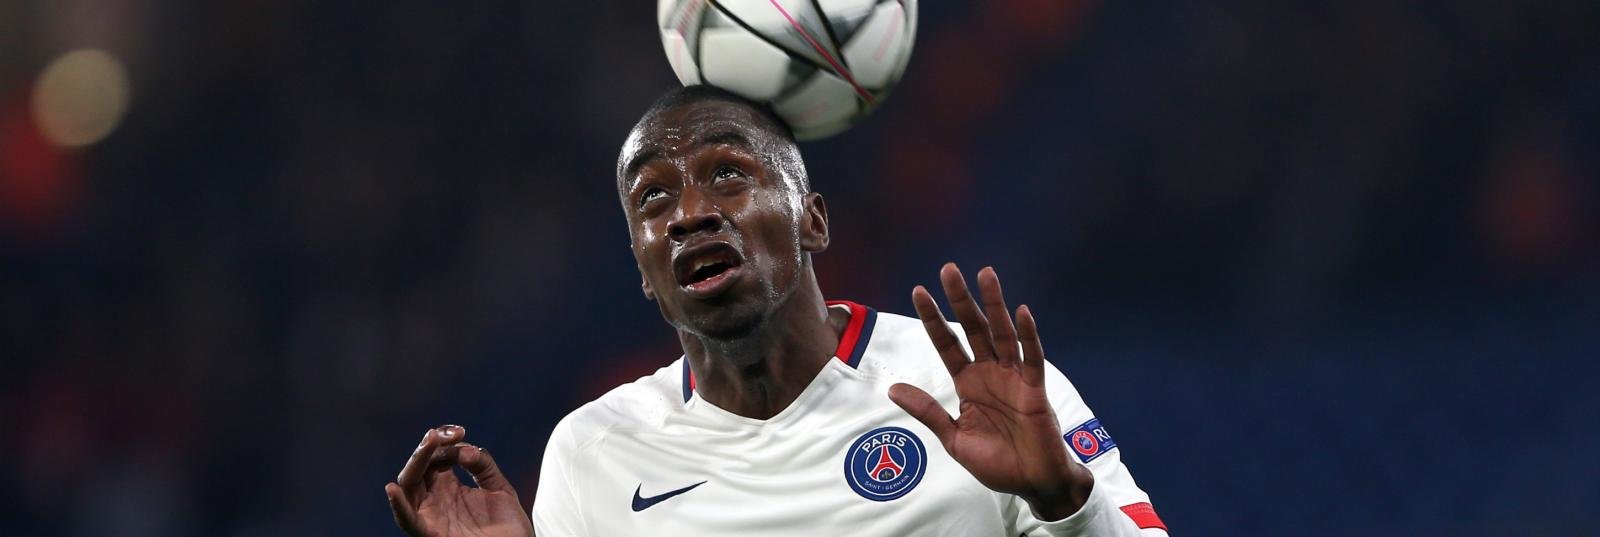 Manchester United linked with £30m PSG star, Chelsea also interested